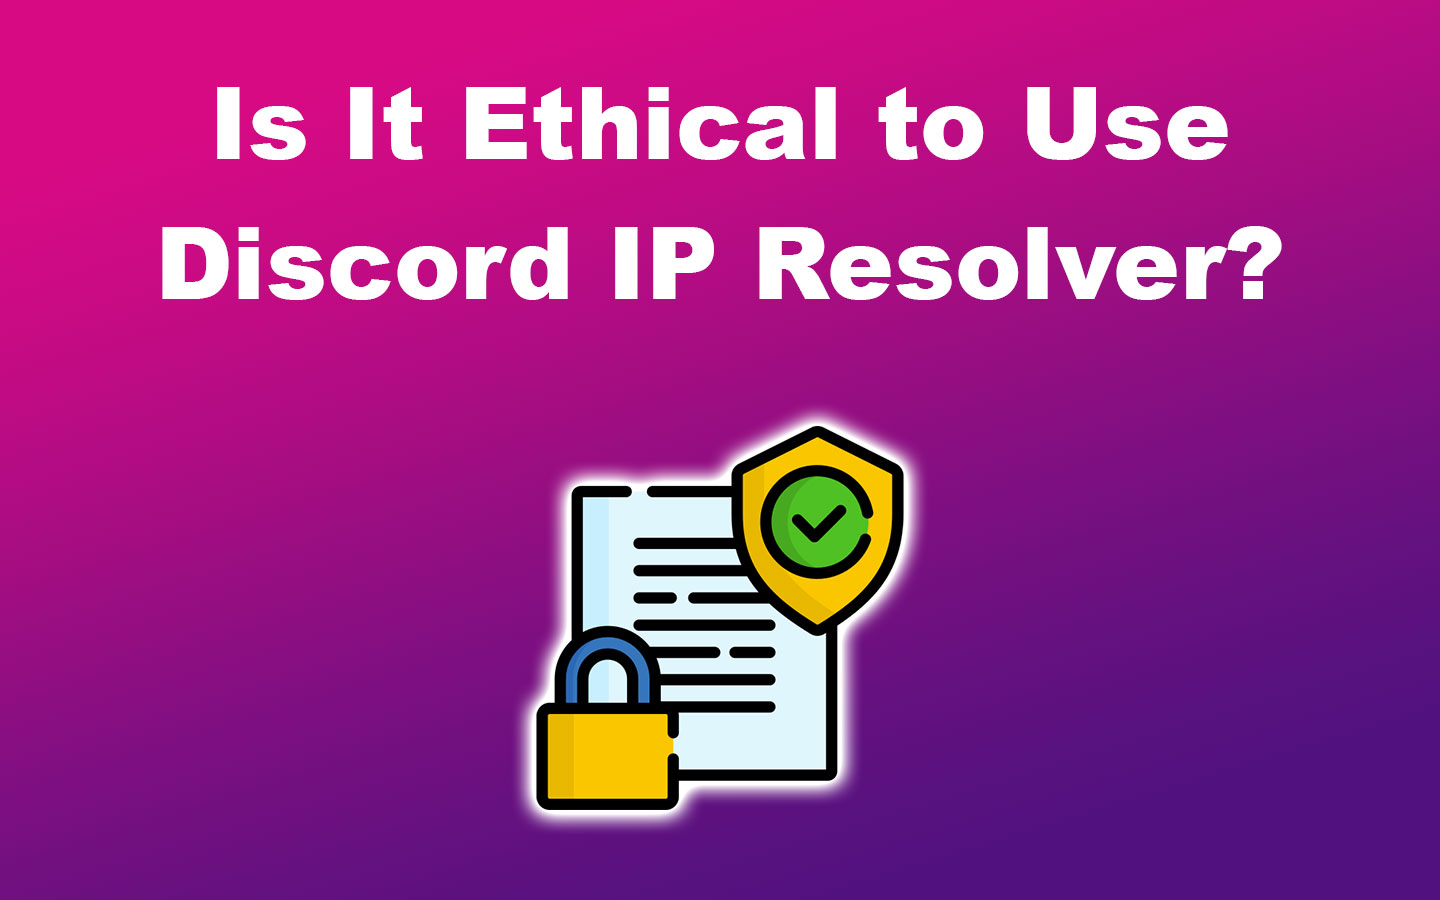 Discord IP Resolver Is It Ethical